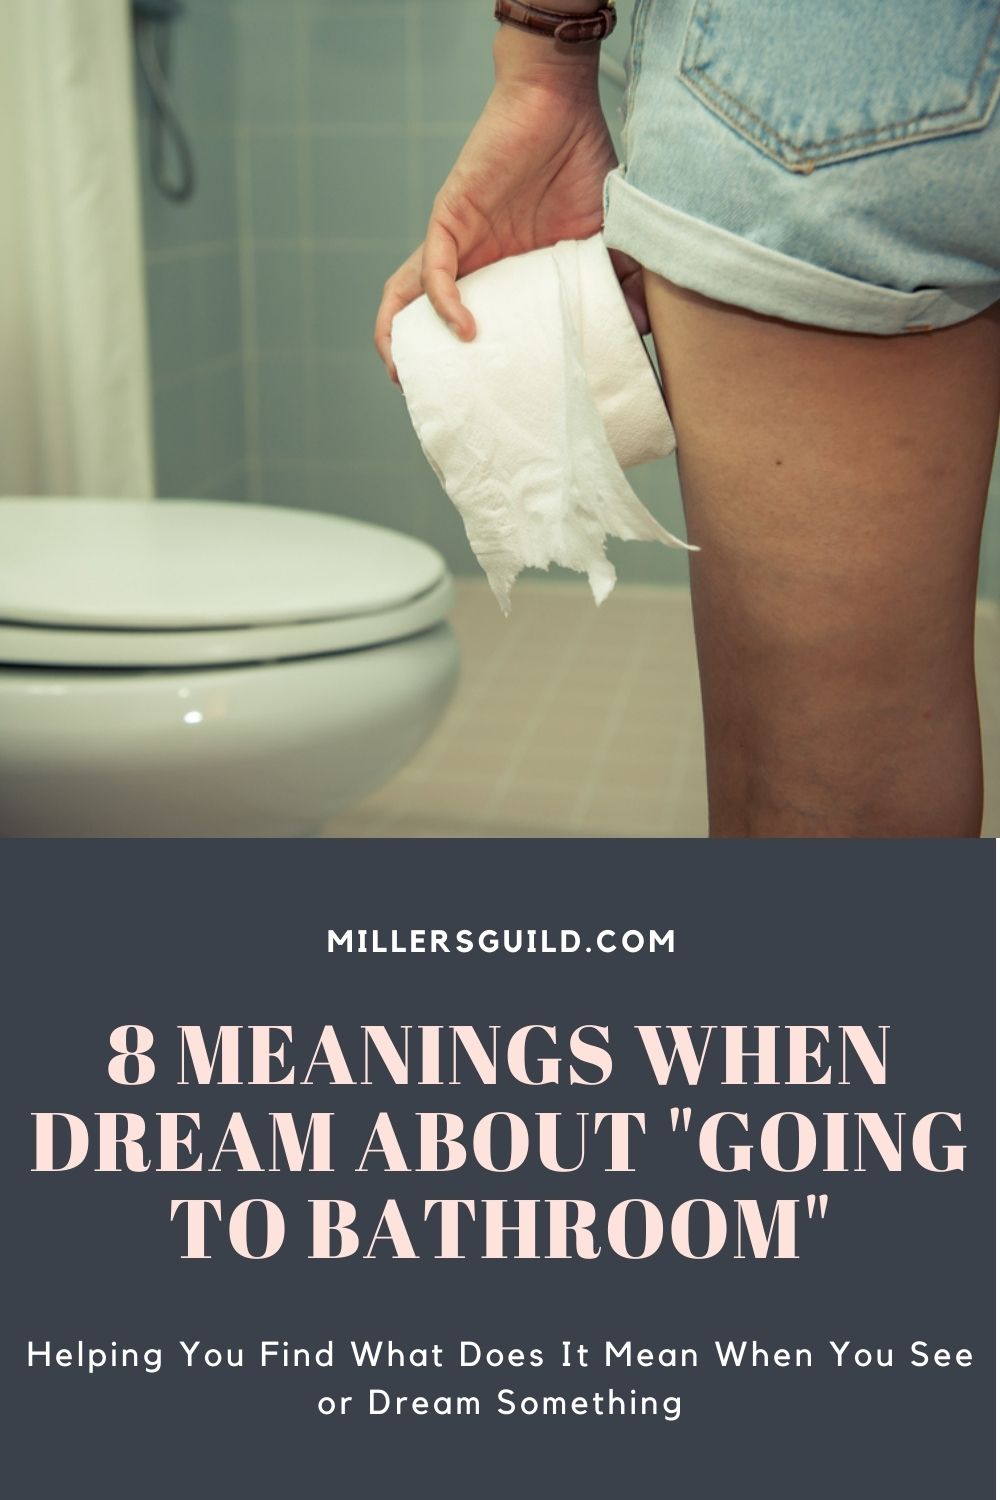 8 Meanings When Dream About Going to Bathroom 4